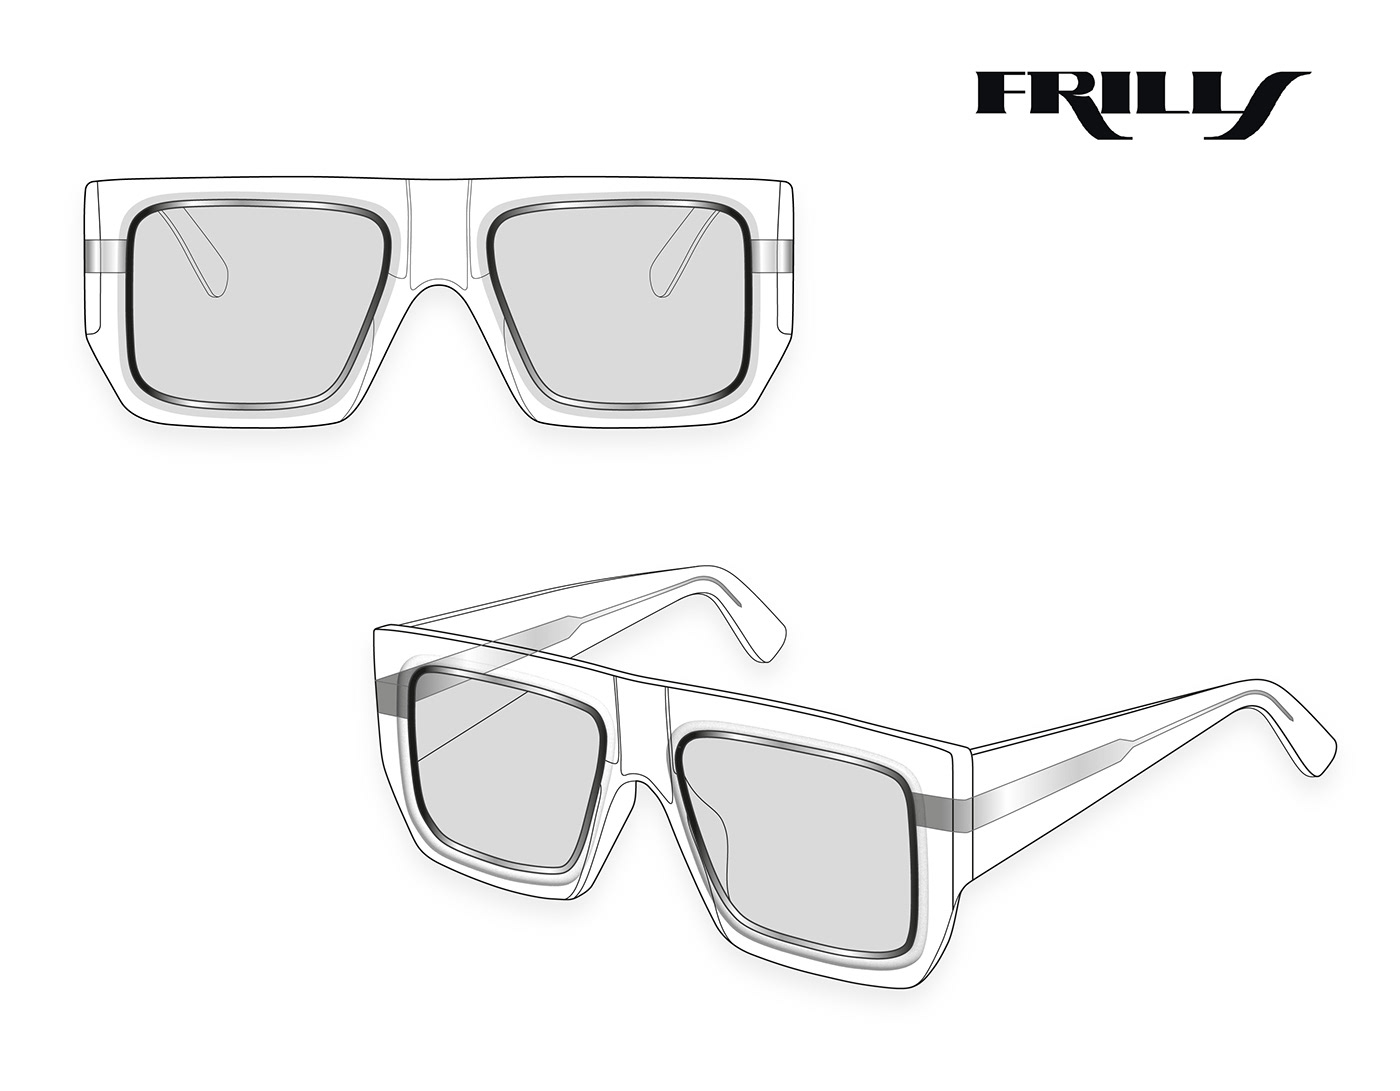 Eyewear technical flat sketches made with Adobe Illustrator